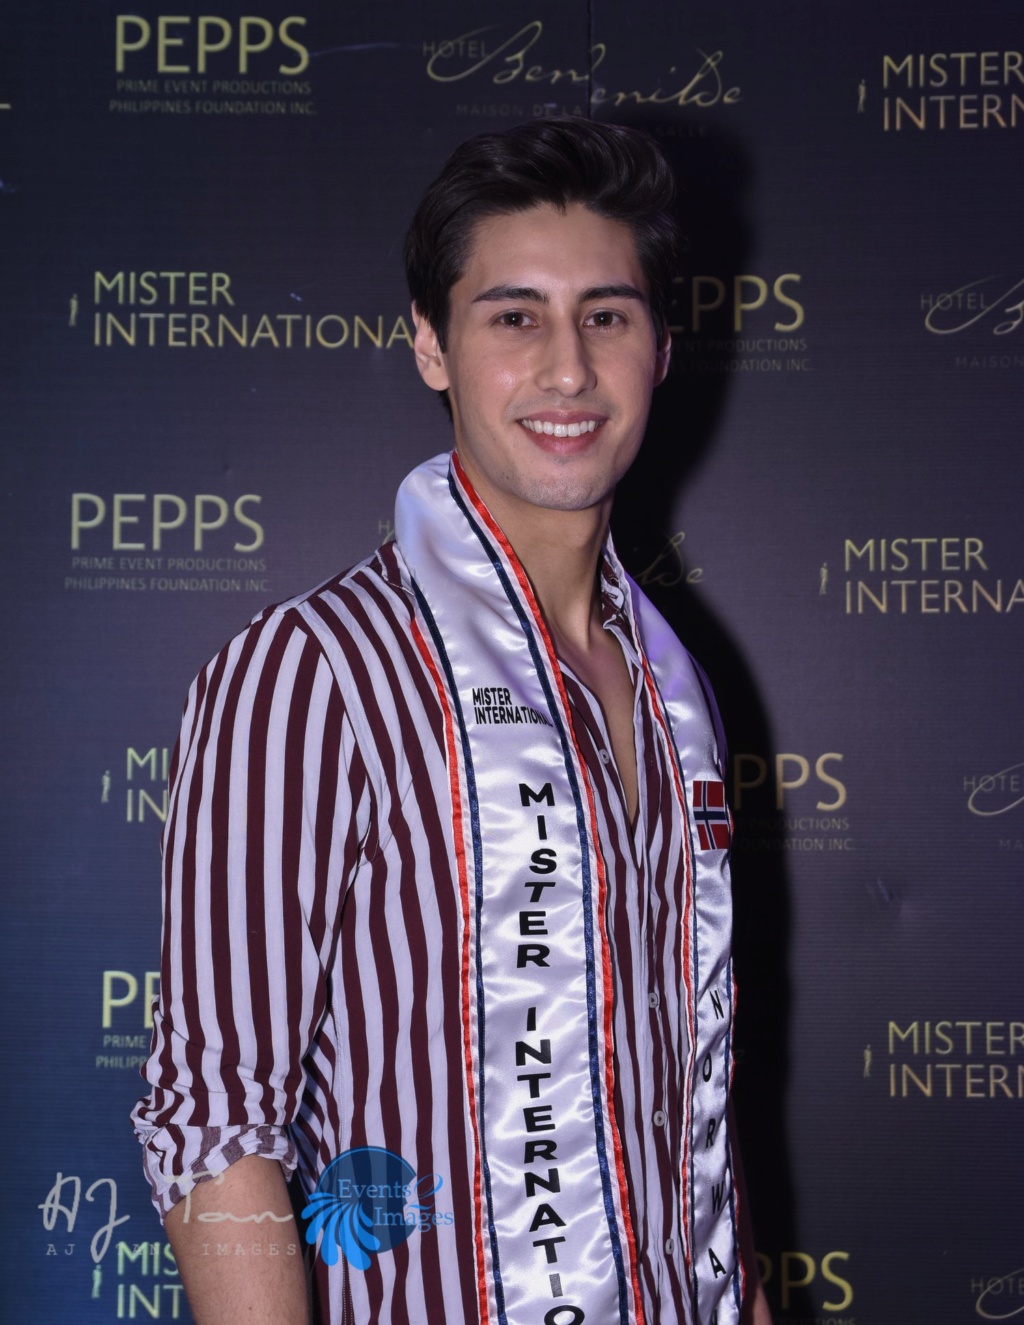 The 13th Mister International in Manila, Philippines on February 24,2019 - Page 6 51716712